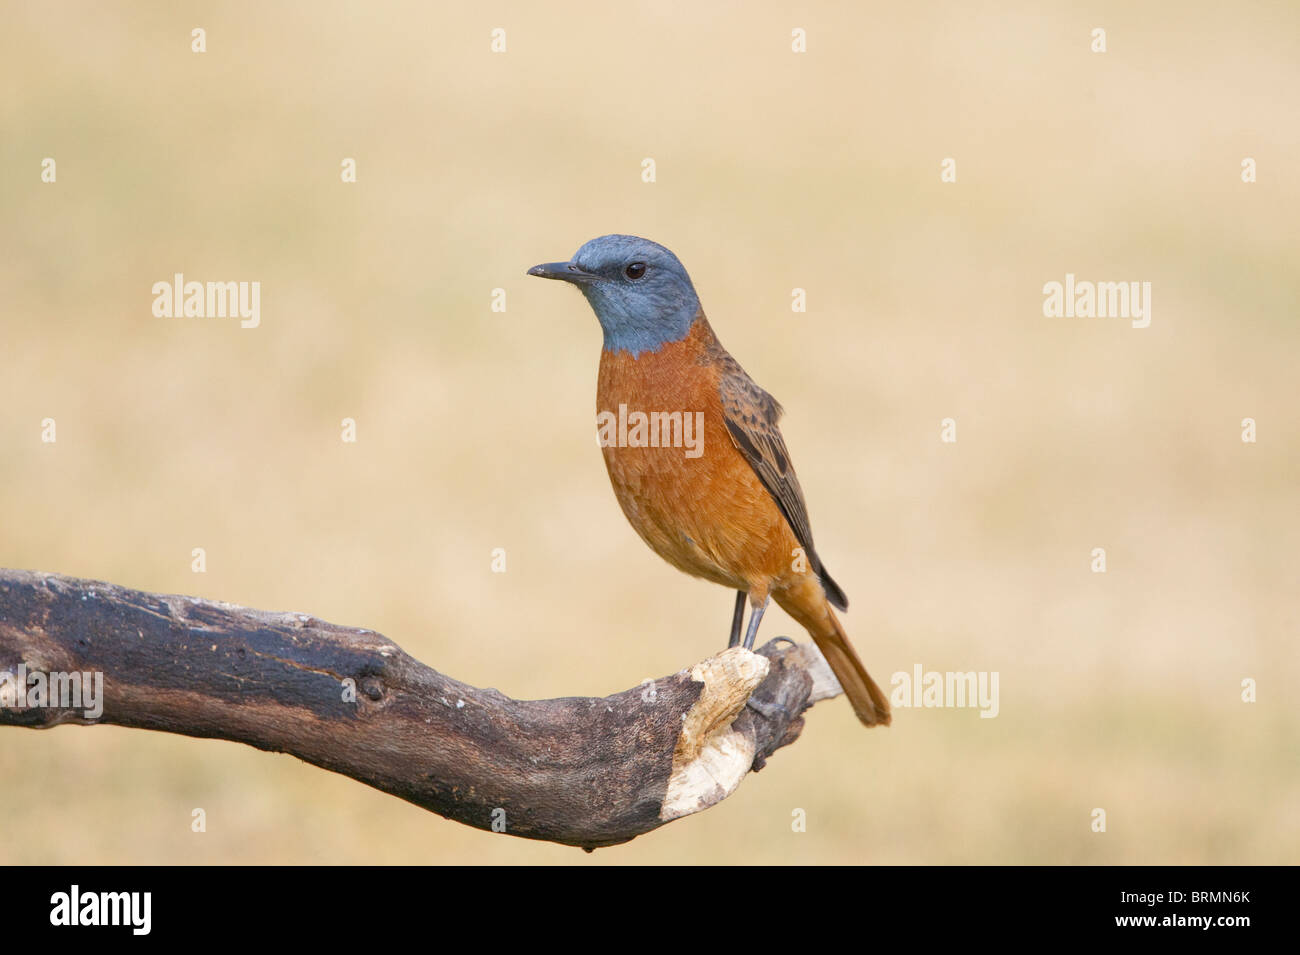 Cape Rock thrush perched on dry branch Stock Photo